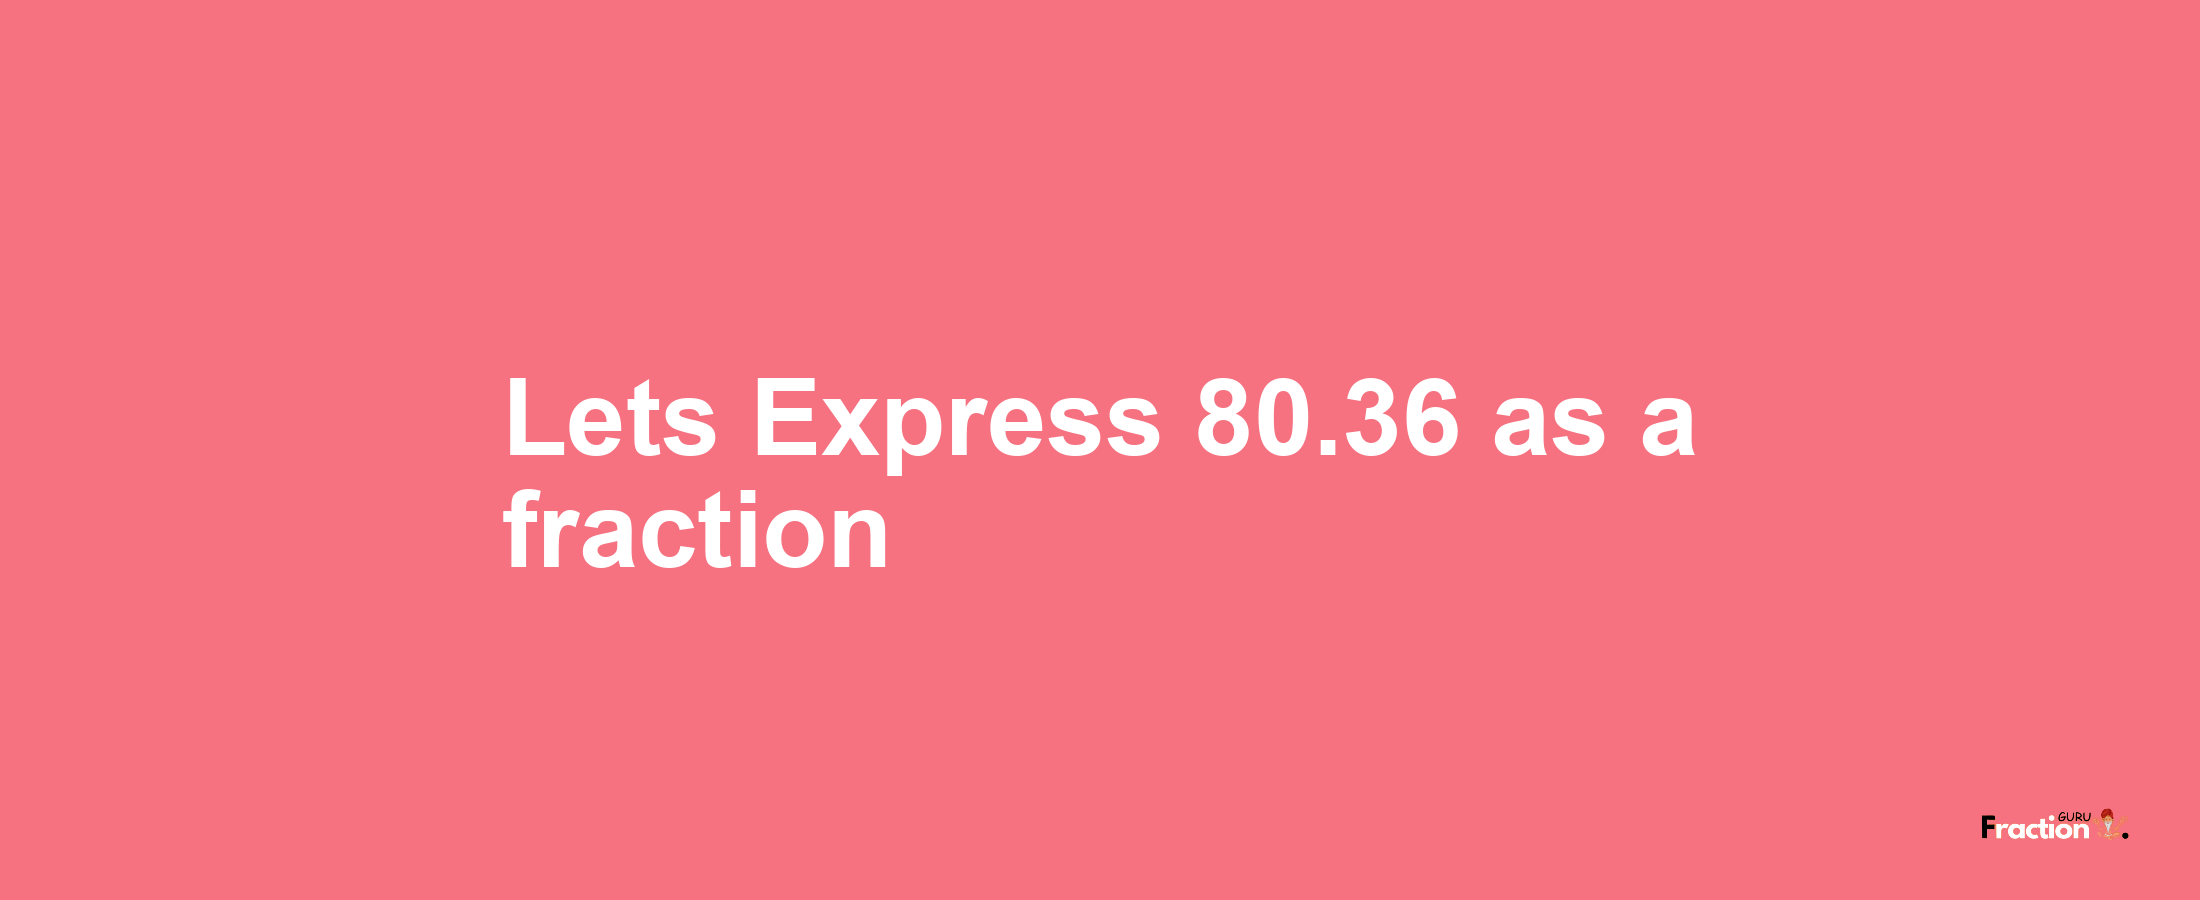 Lets Express 80.36 as afraction